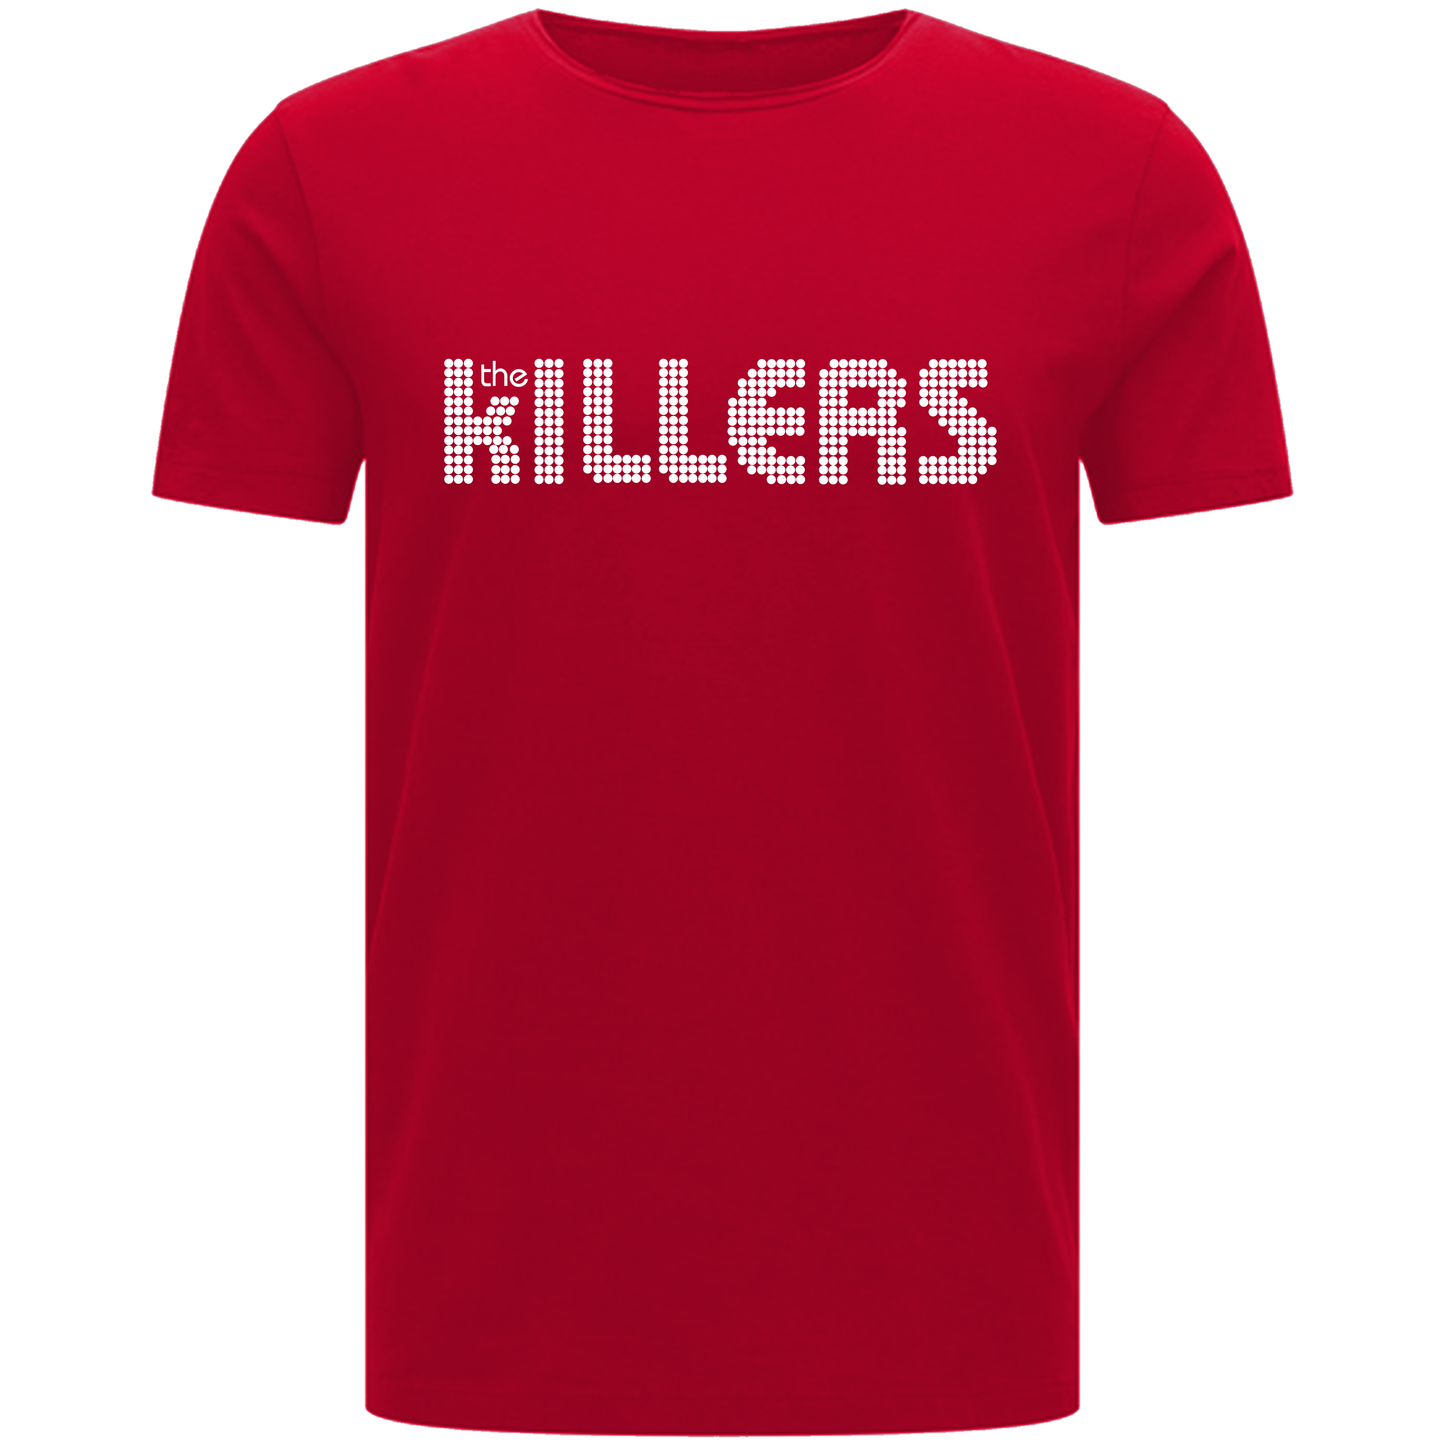 Top Rock Band The Killers Logo Men\'s T-shirt Rock Music Lovers Fashion –  ASR Personalise